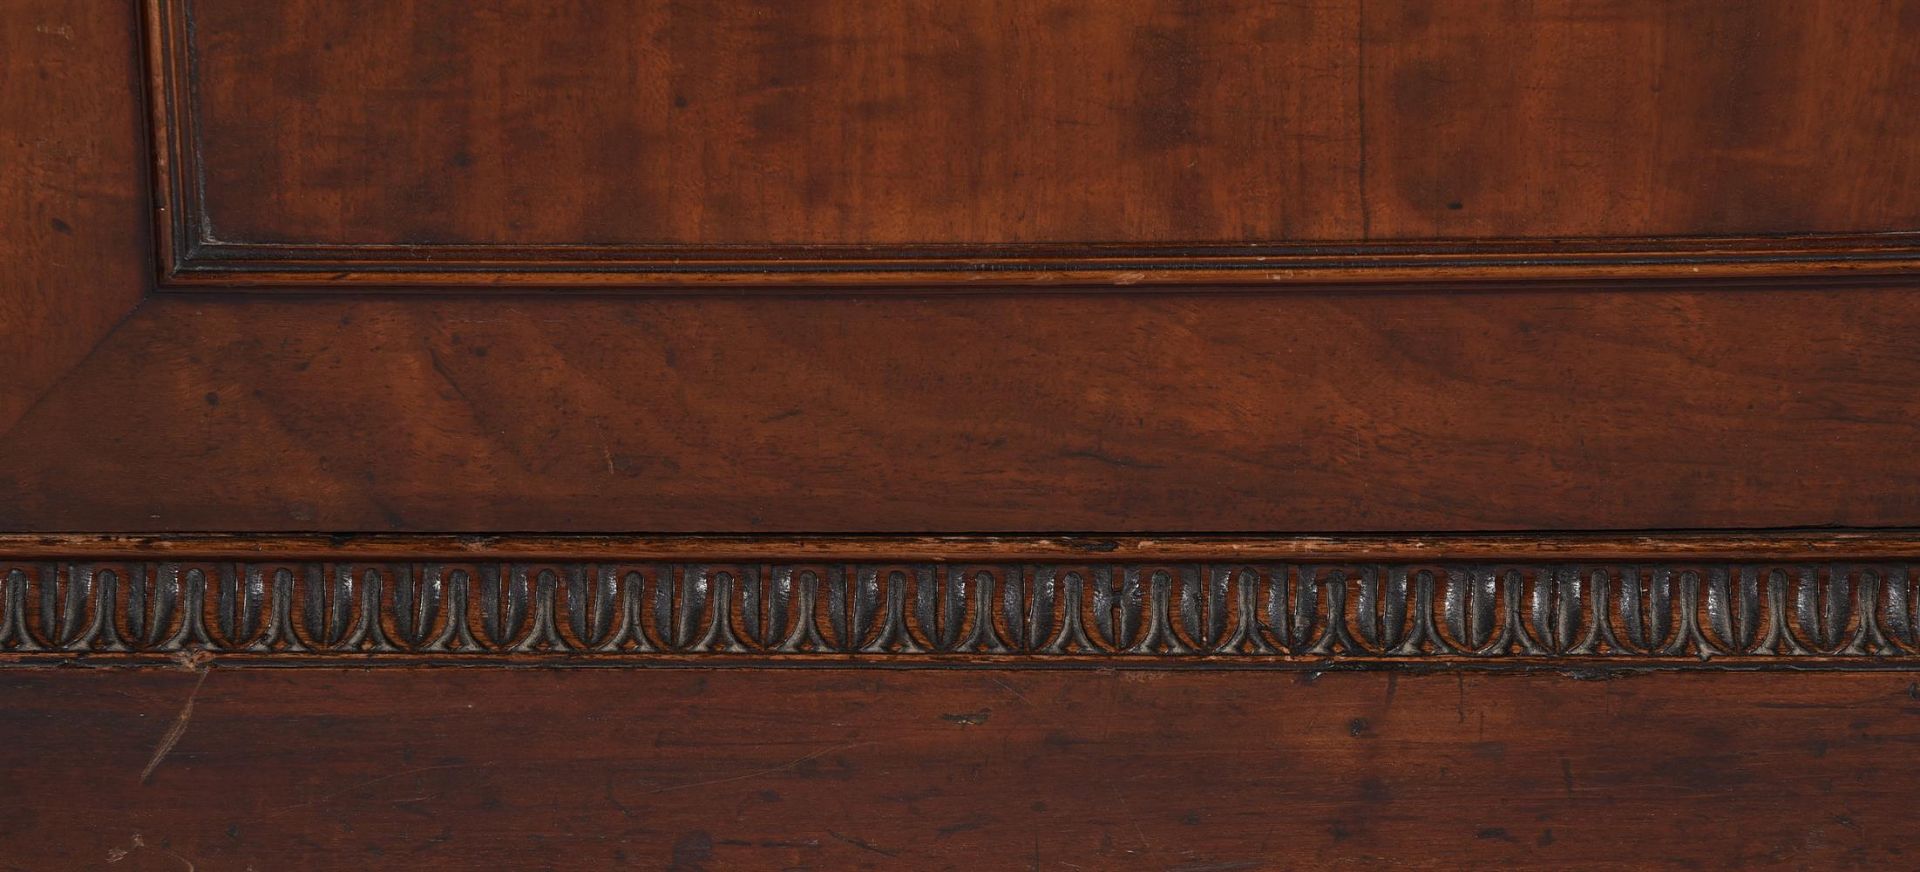 A PAIR OF GEORGE III MAHOGANY AND PARCEL GILT PEDESTAL CUPBOARDS, LATE 18TH CENTURY - Image 5 of 7